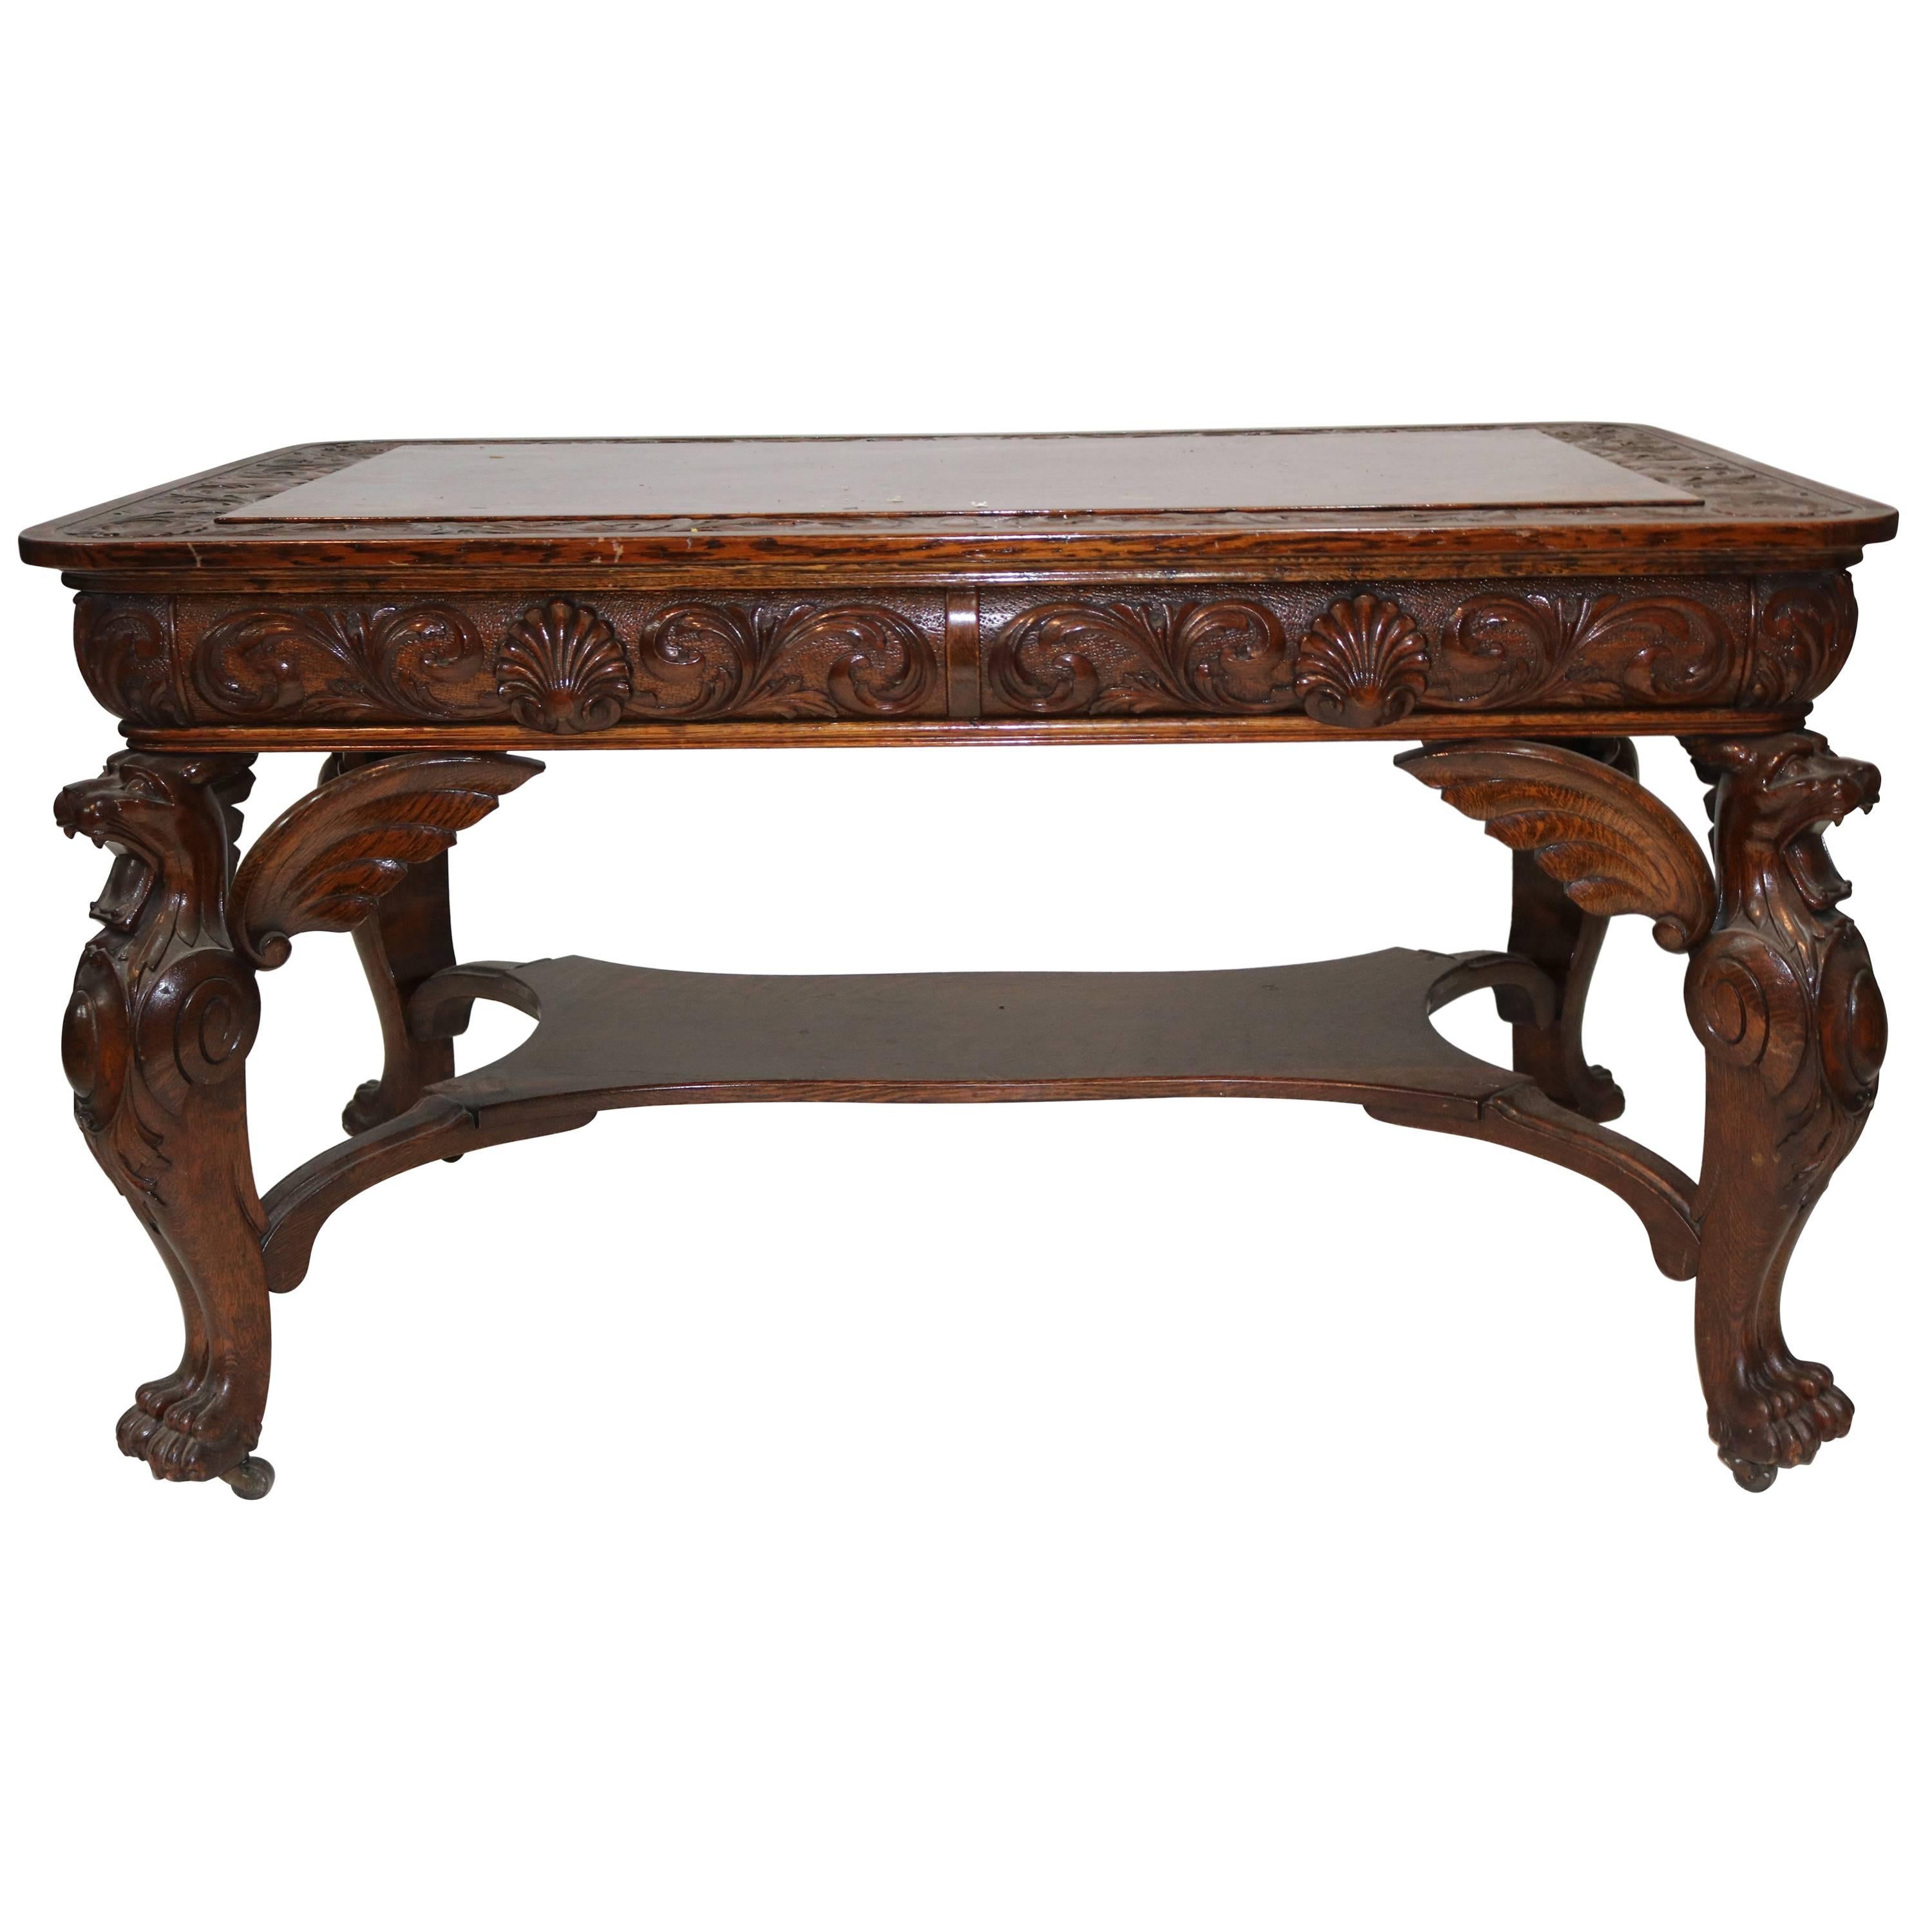 To the manor born-from a connoisseur to a connoisseur for one who quests the best-a heavily carved masterpiece!!!
Can you just see J P Morgan the baron of industry sitting in his grand mansion behind this power desk!
An 1880s refined meticulously